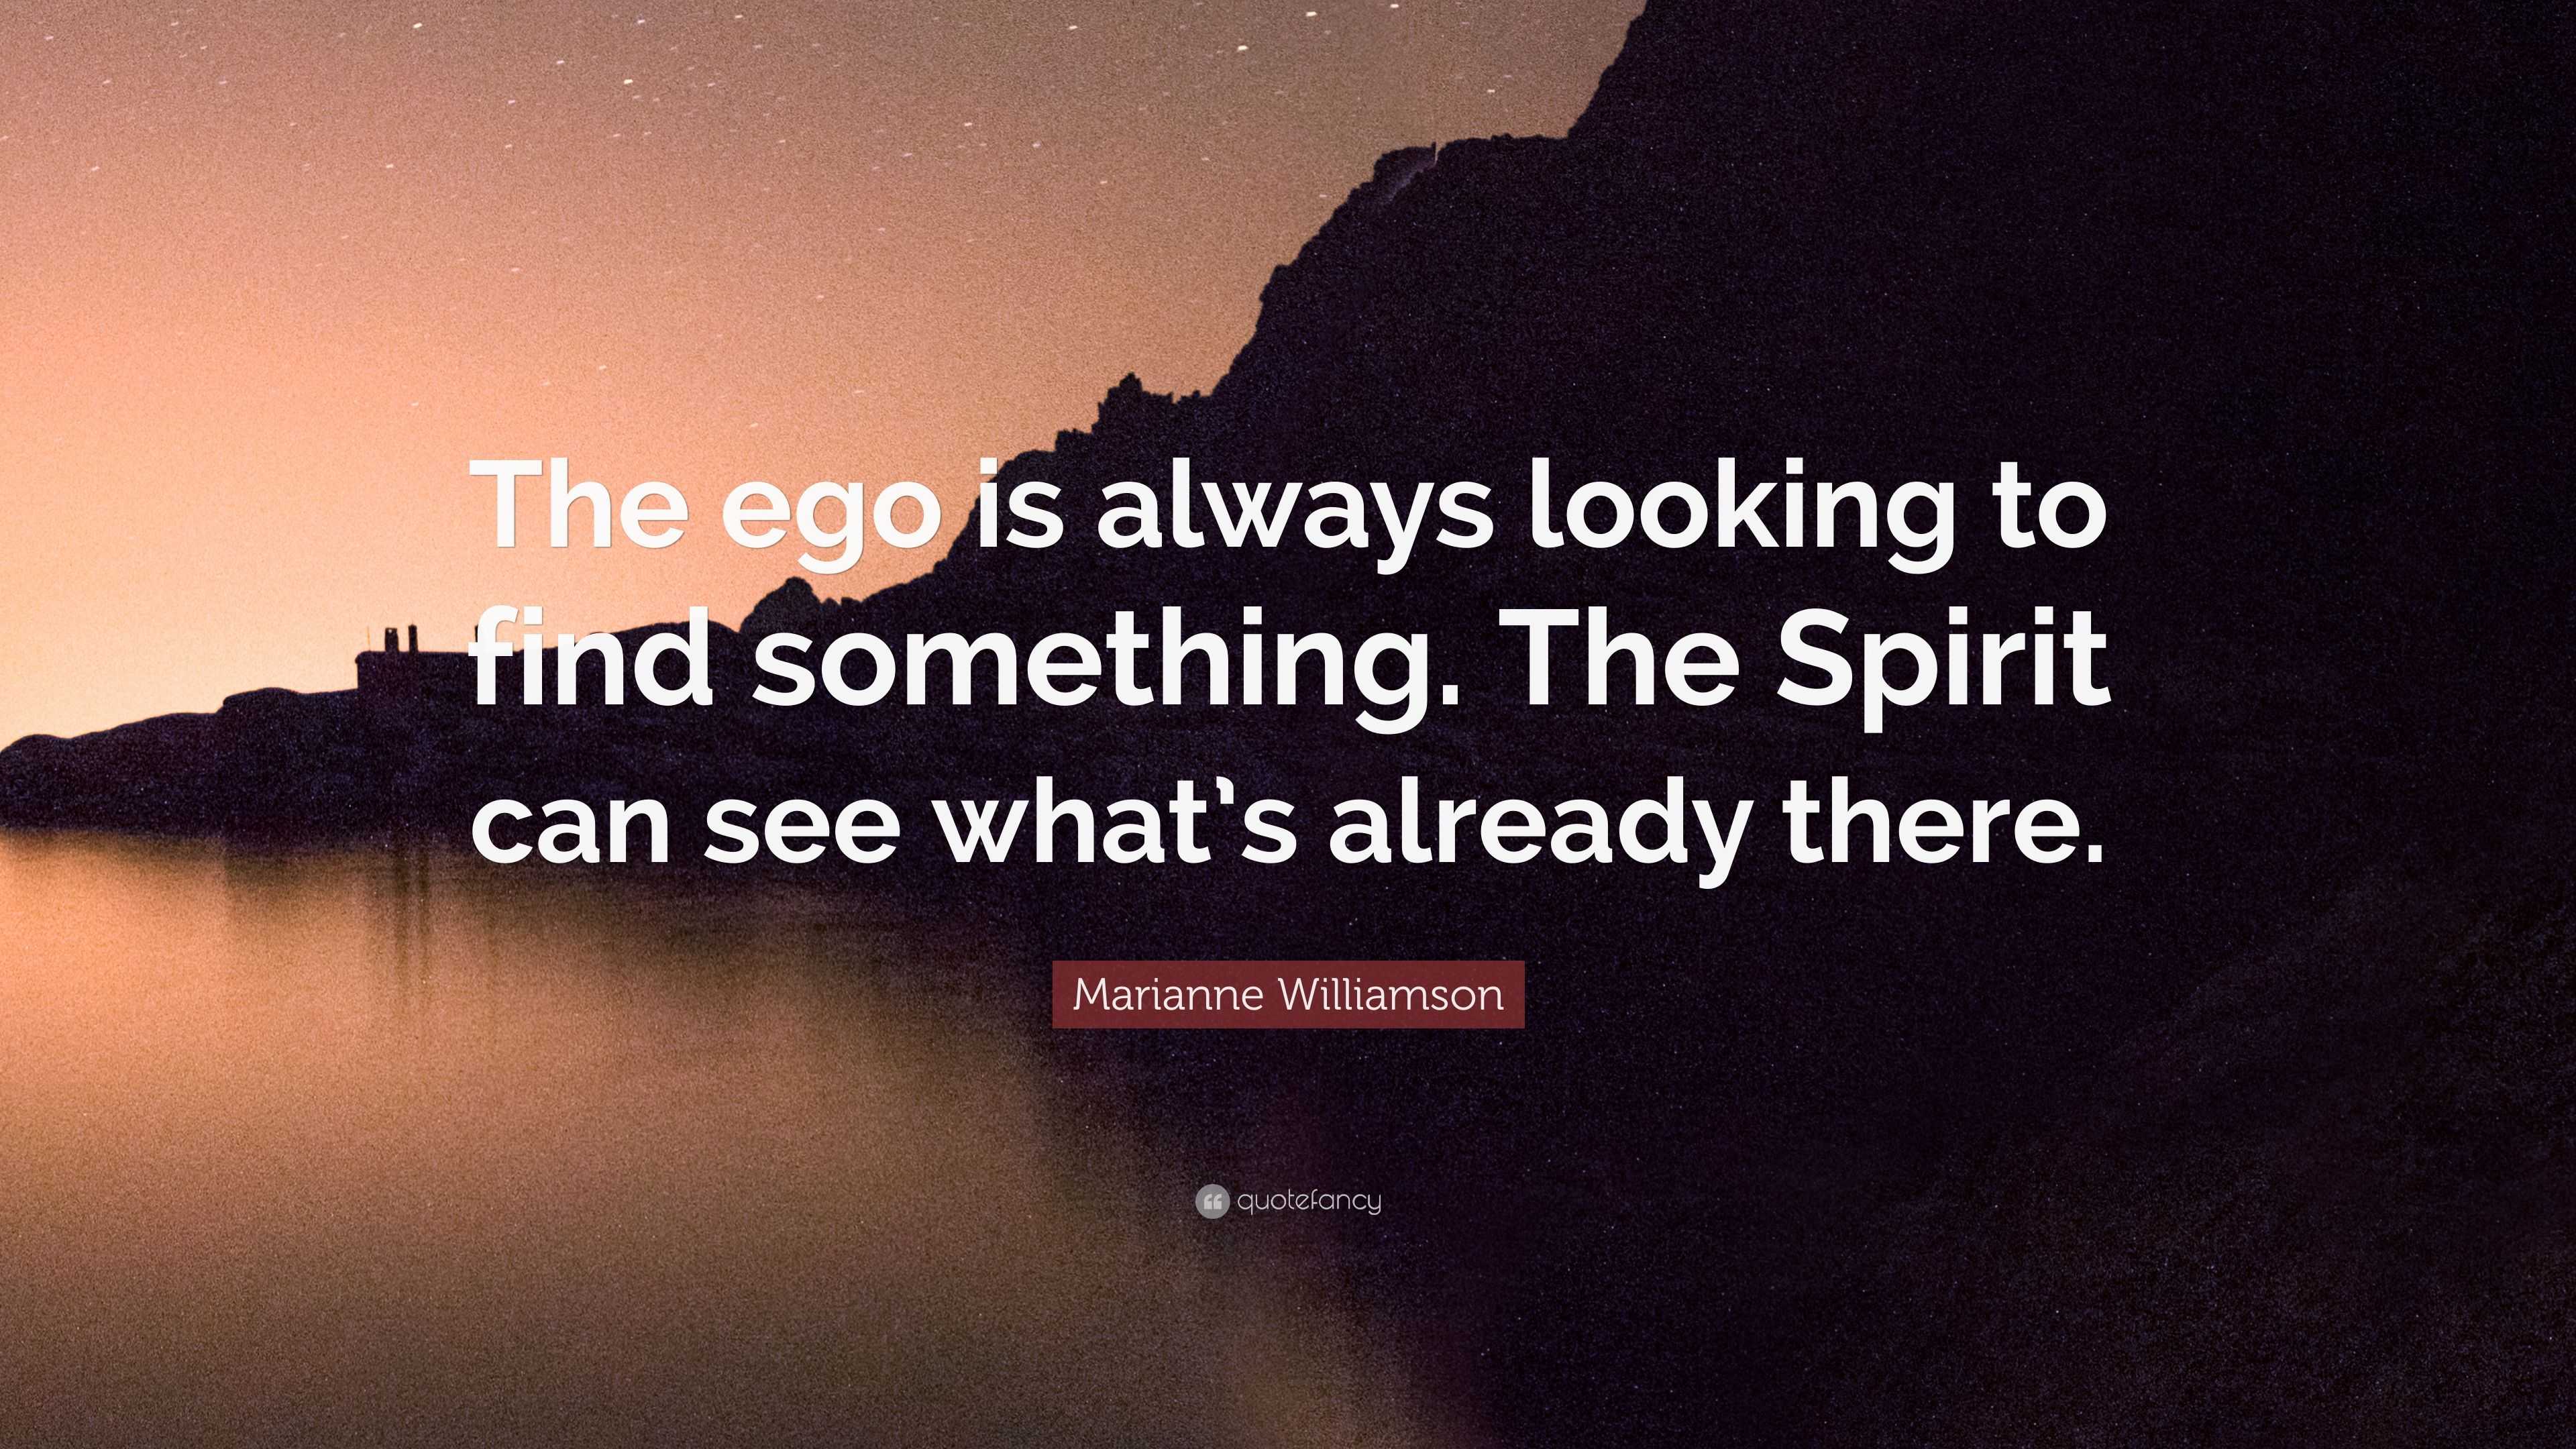 Marianne Williamson Quote: “The ego is always looking to find something ...